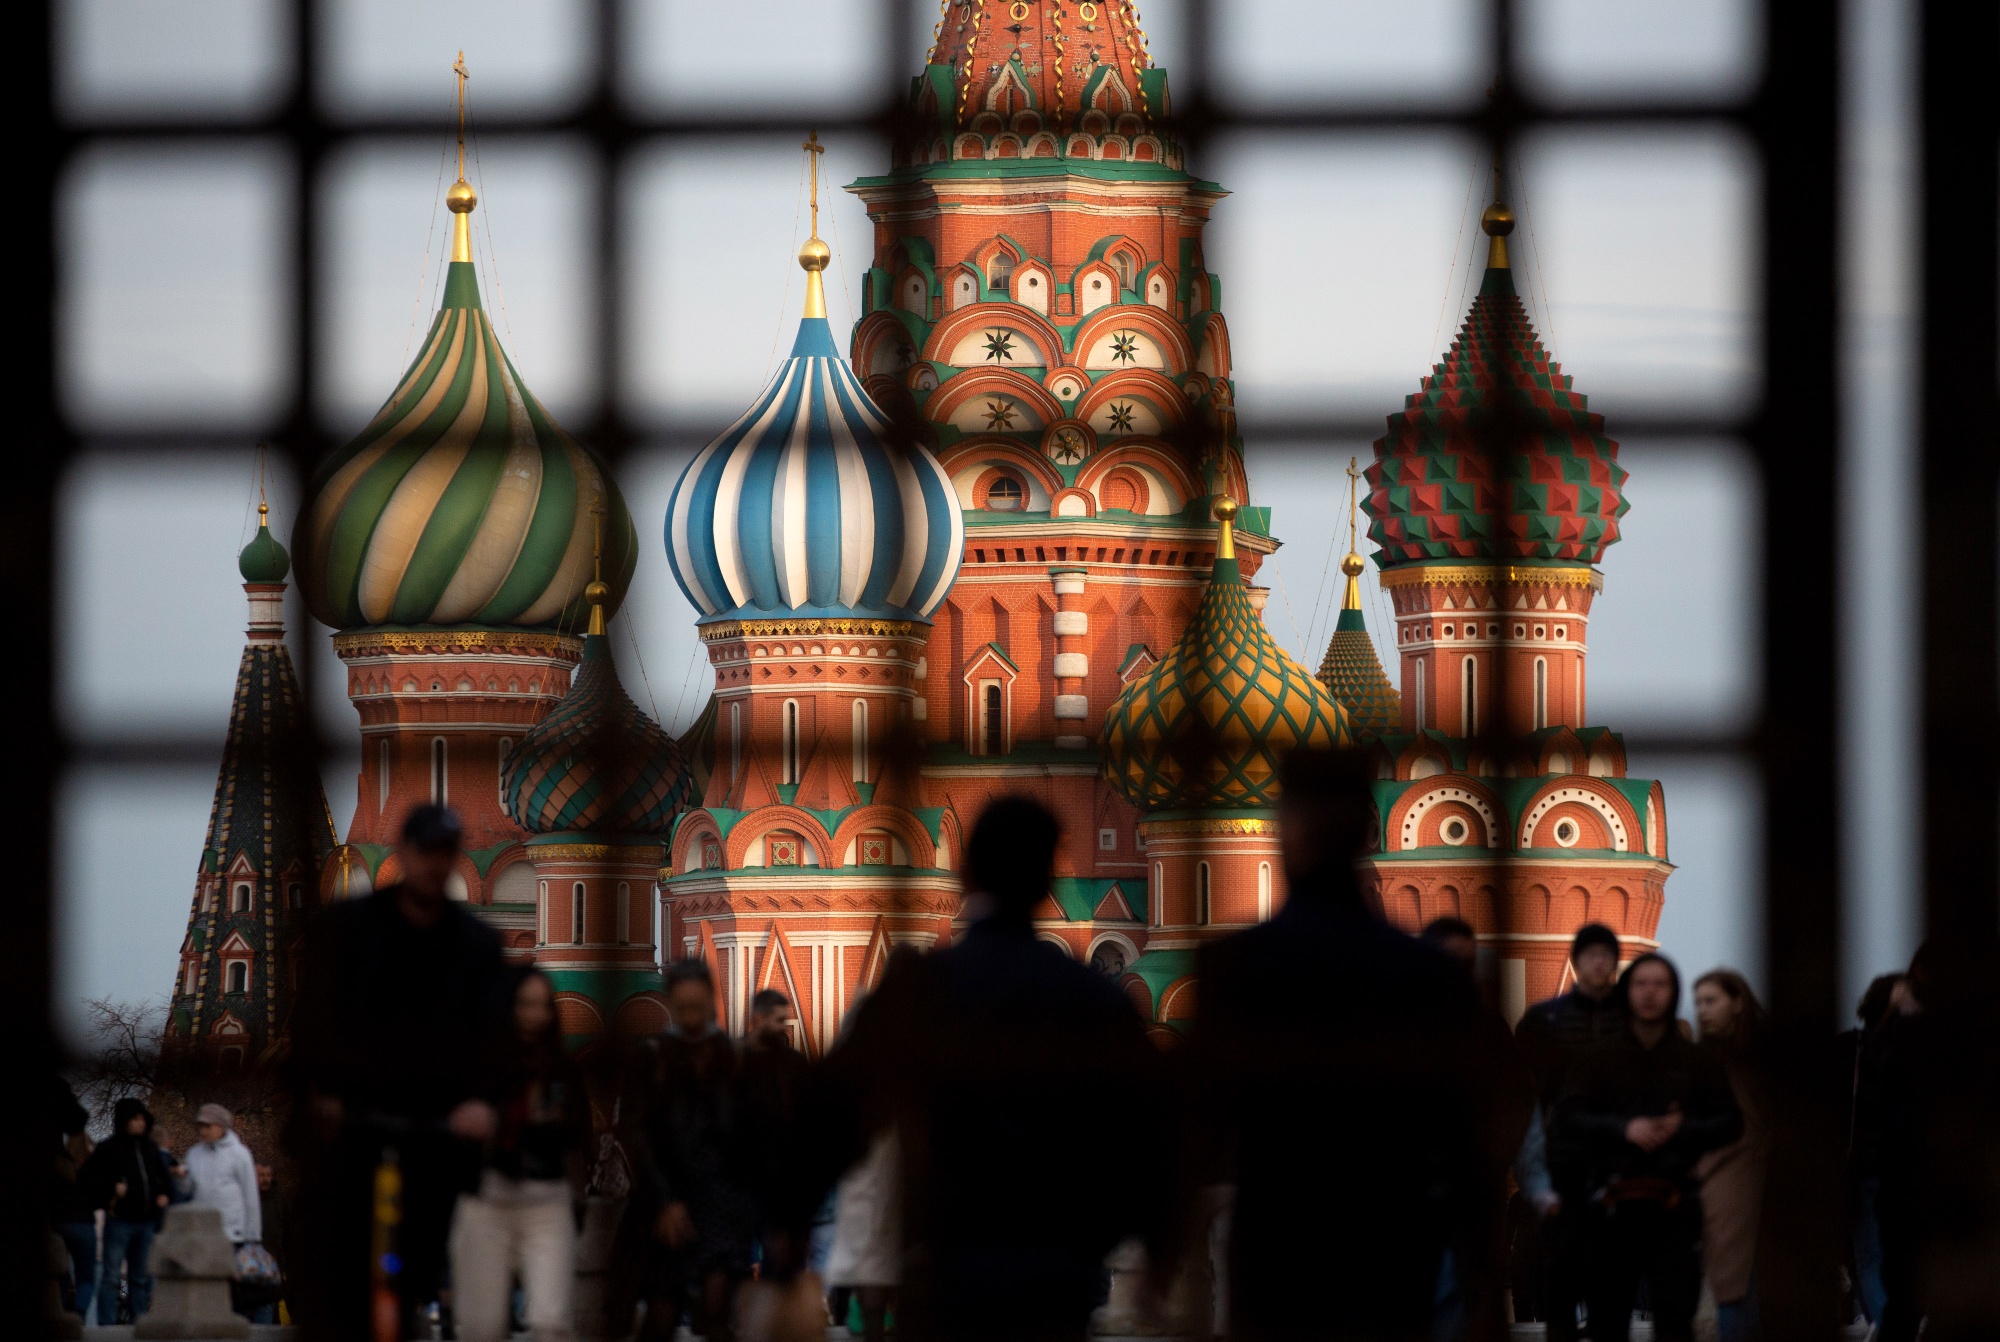 The&nbsp;Kremlin&nbsp;is trying to contain the epidemic without alarming Russians.